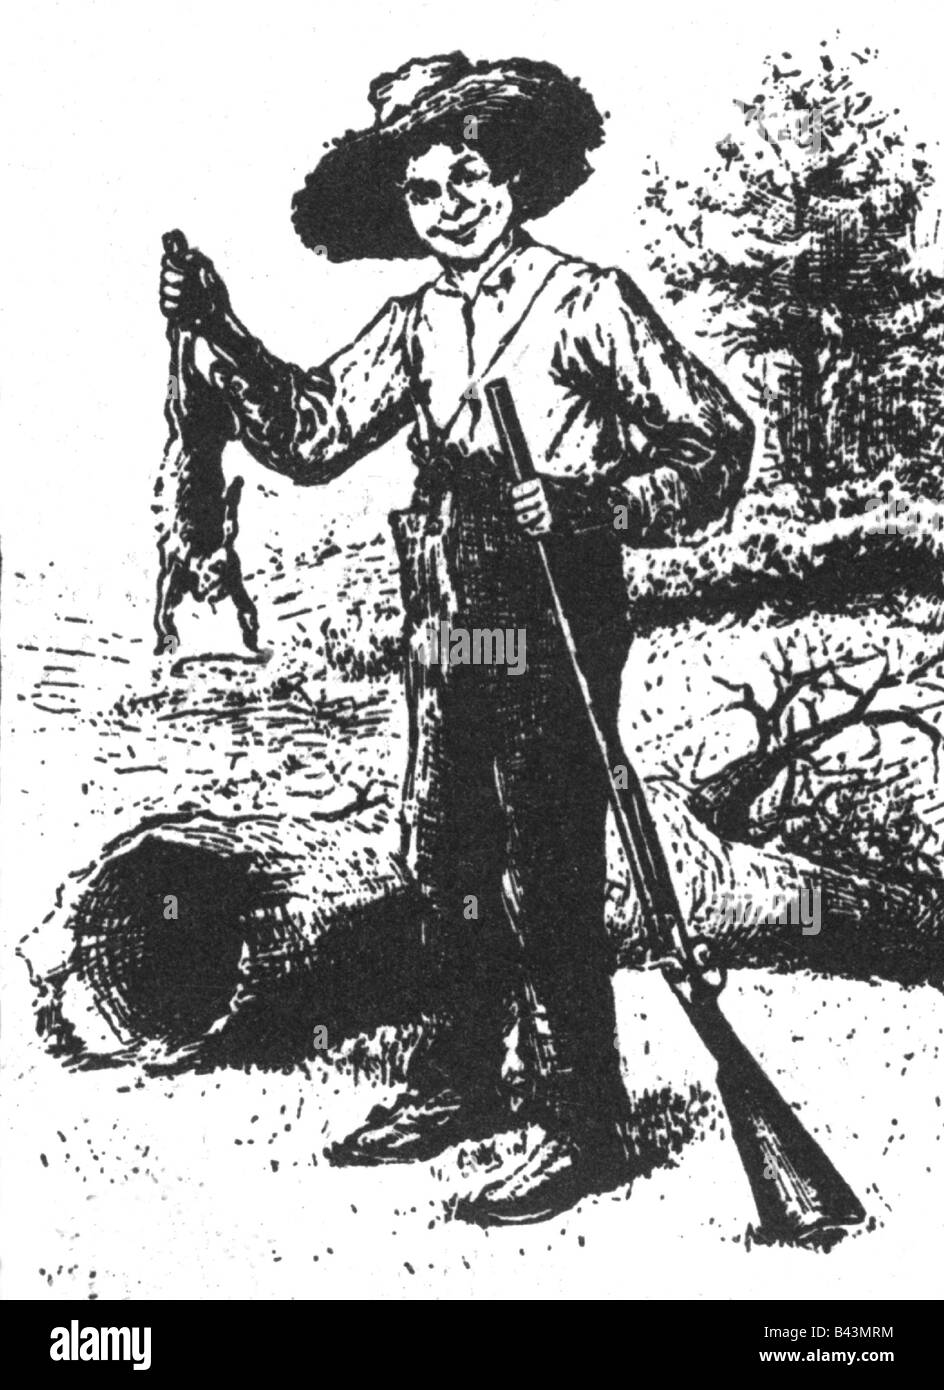 Twain, Mark, 30.11.1835 - 21.4.1910, American author / writer, works, 'Adventures of Huckleberry Finn', 1884, illustration by E. W. Kemble, Stock Photo